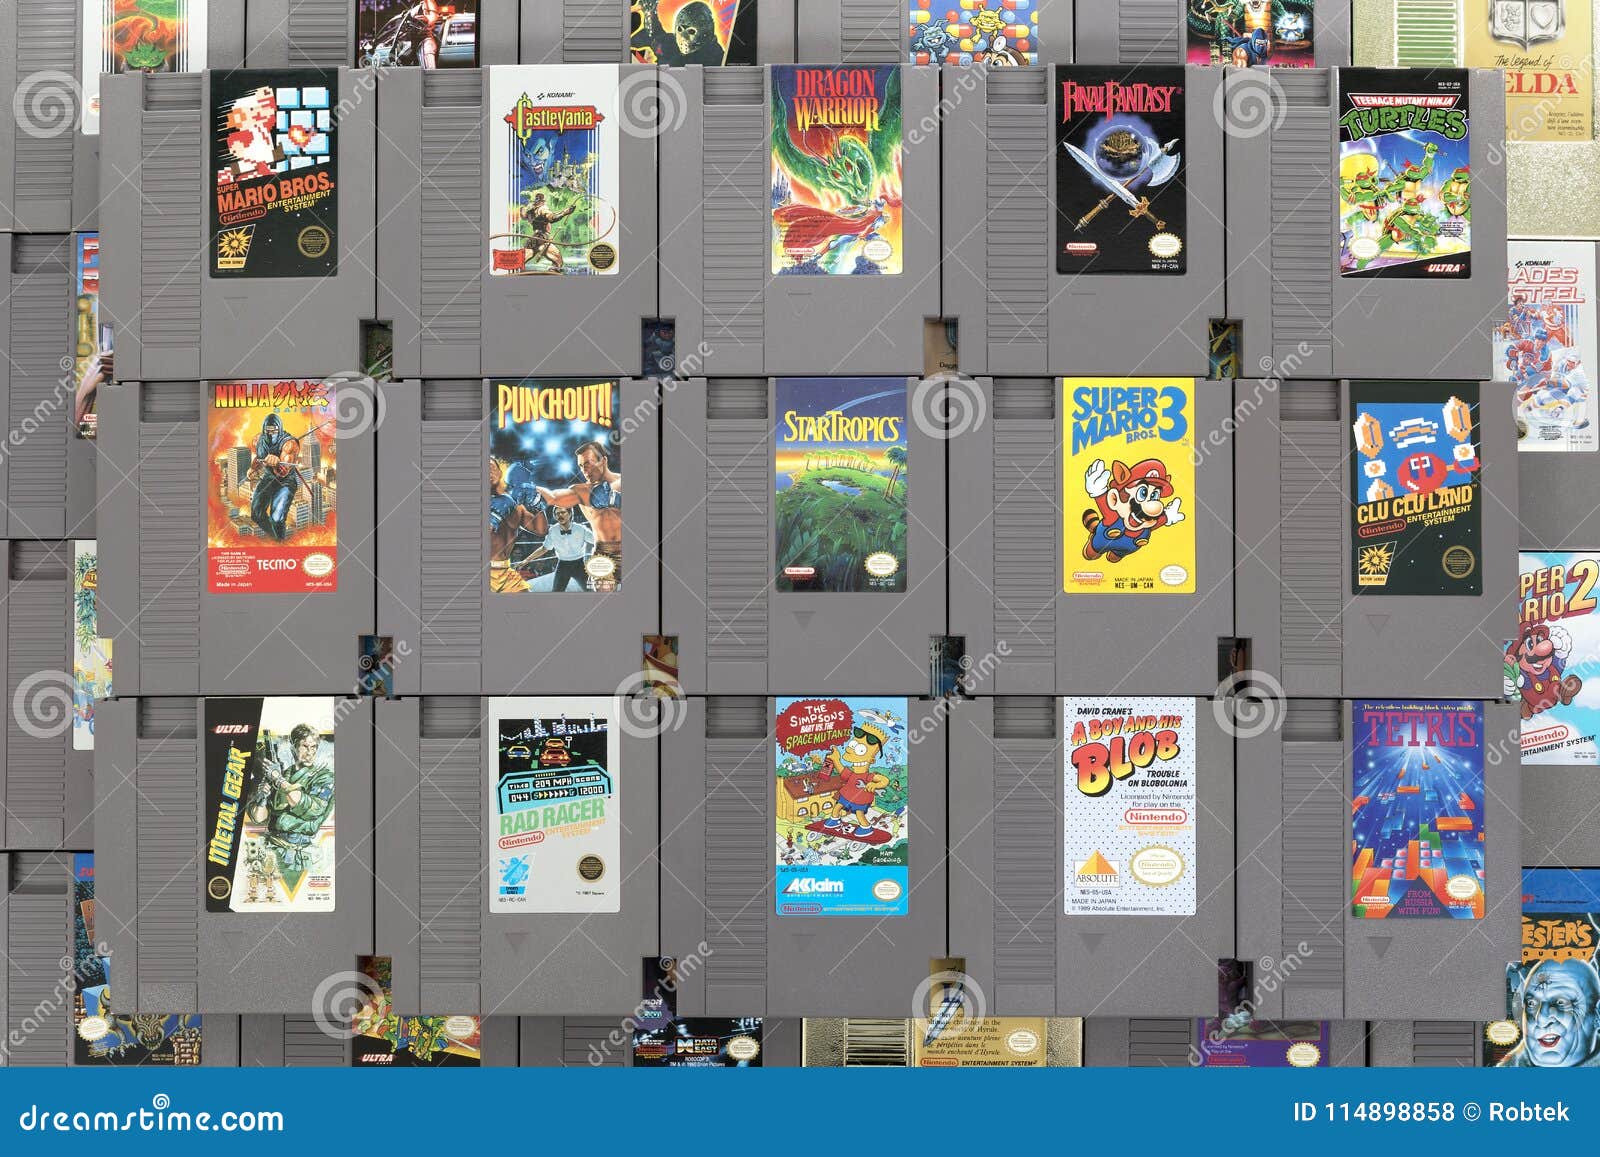 where to buy nes games